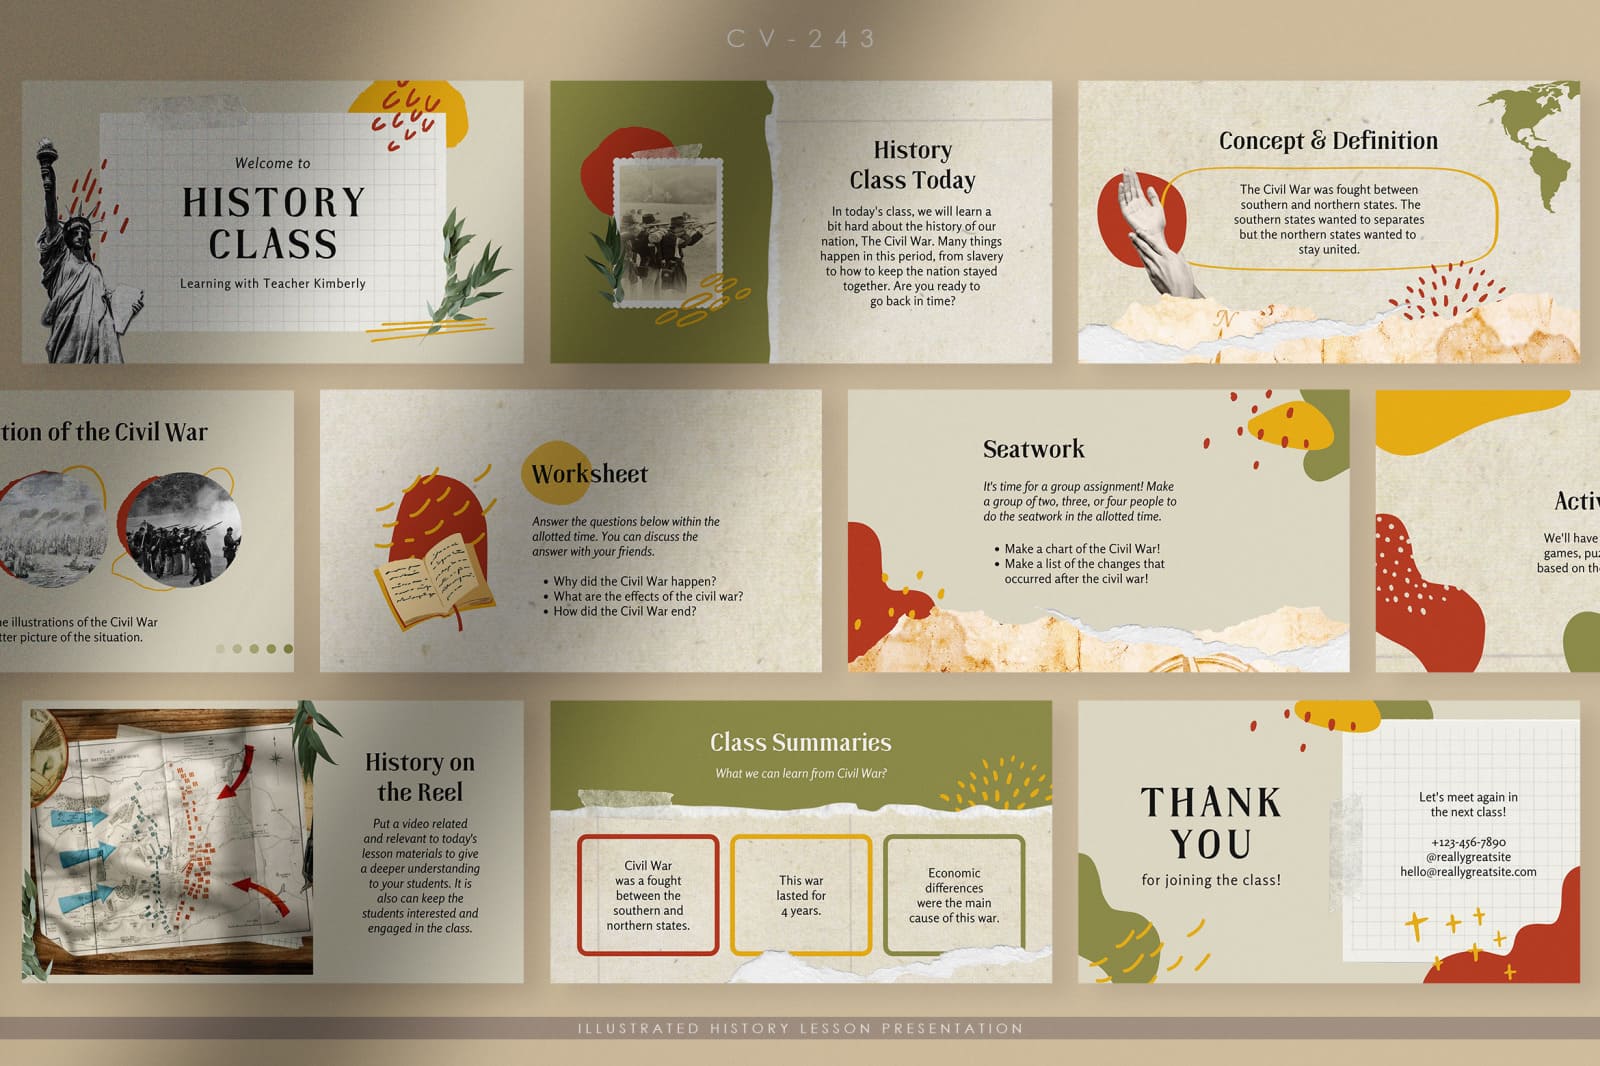 soft nature illustrated history lesson presentation template.